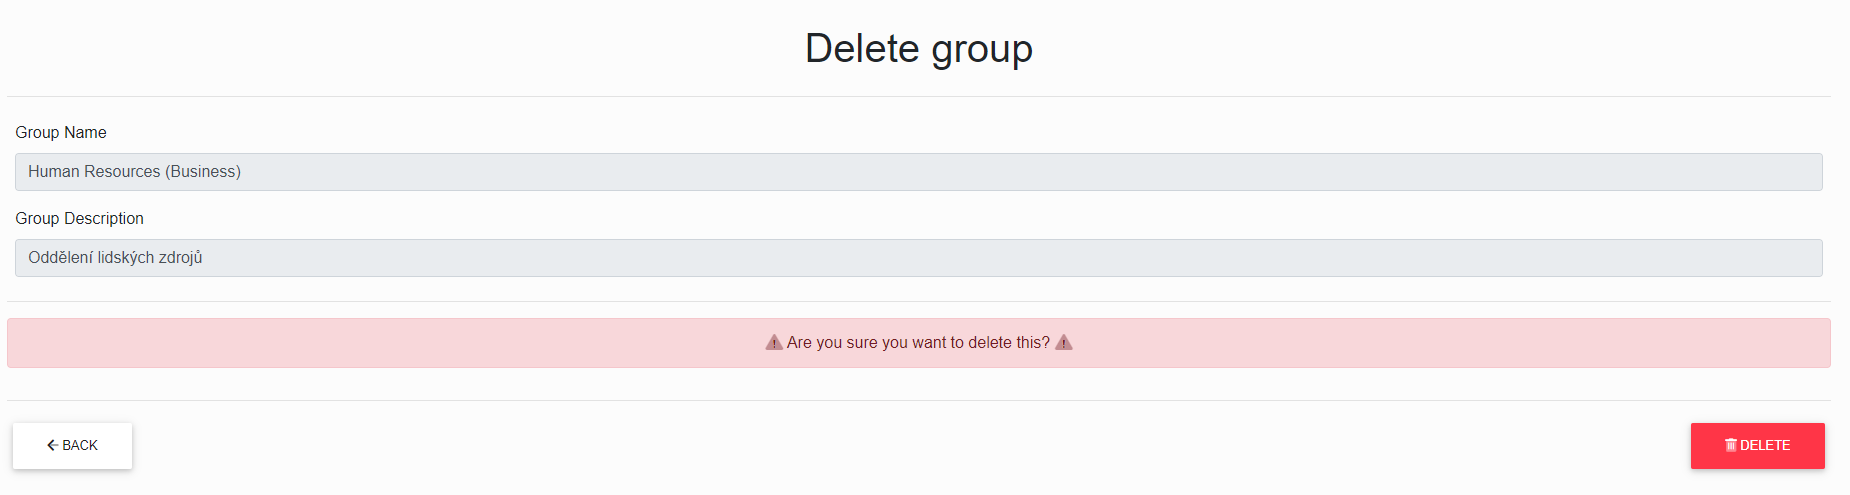 DELETE GROUP.png